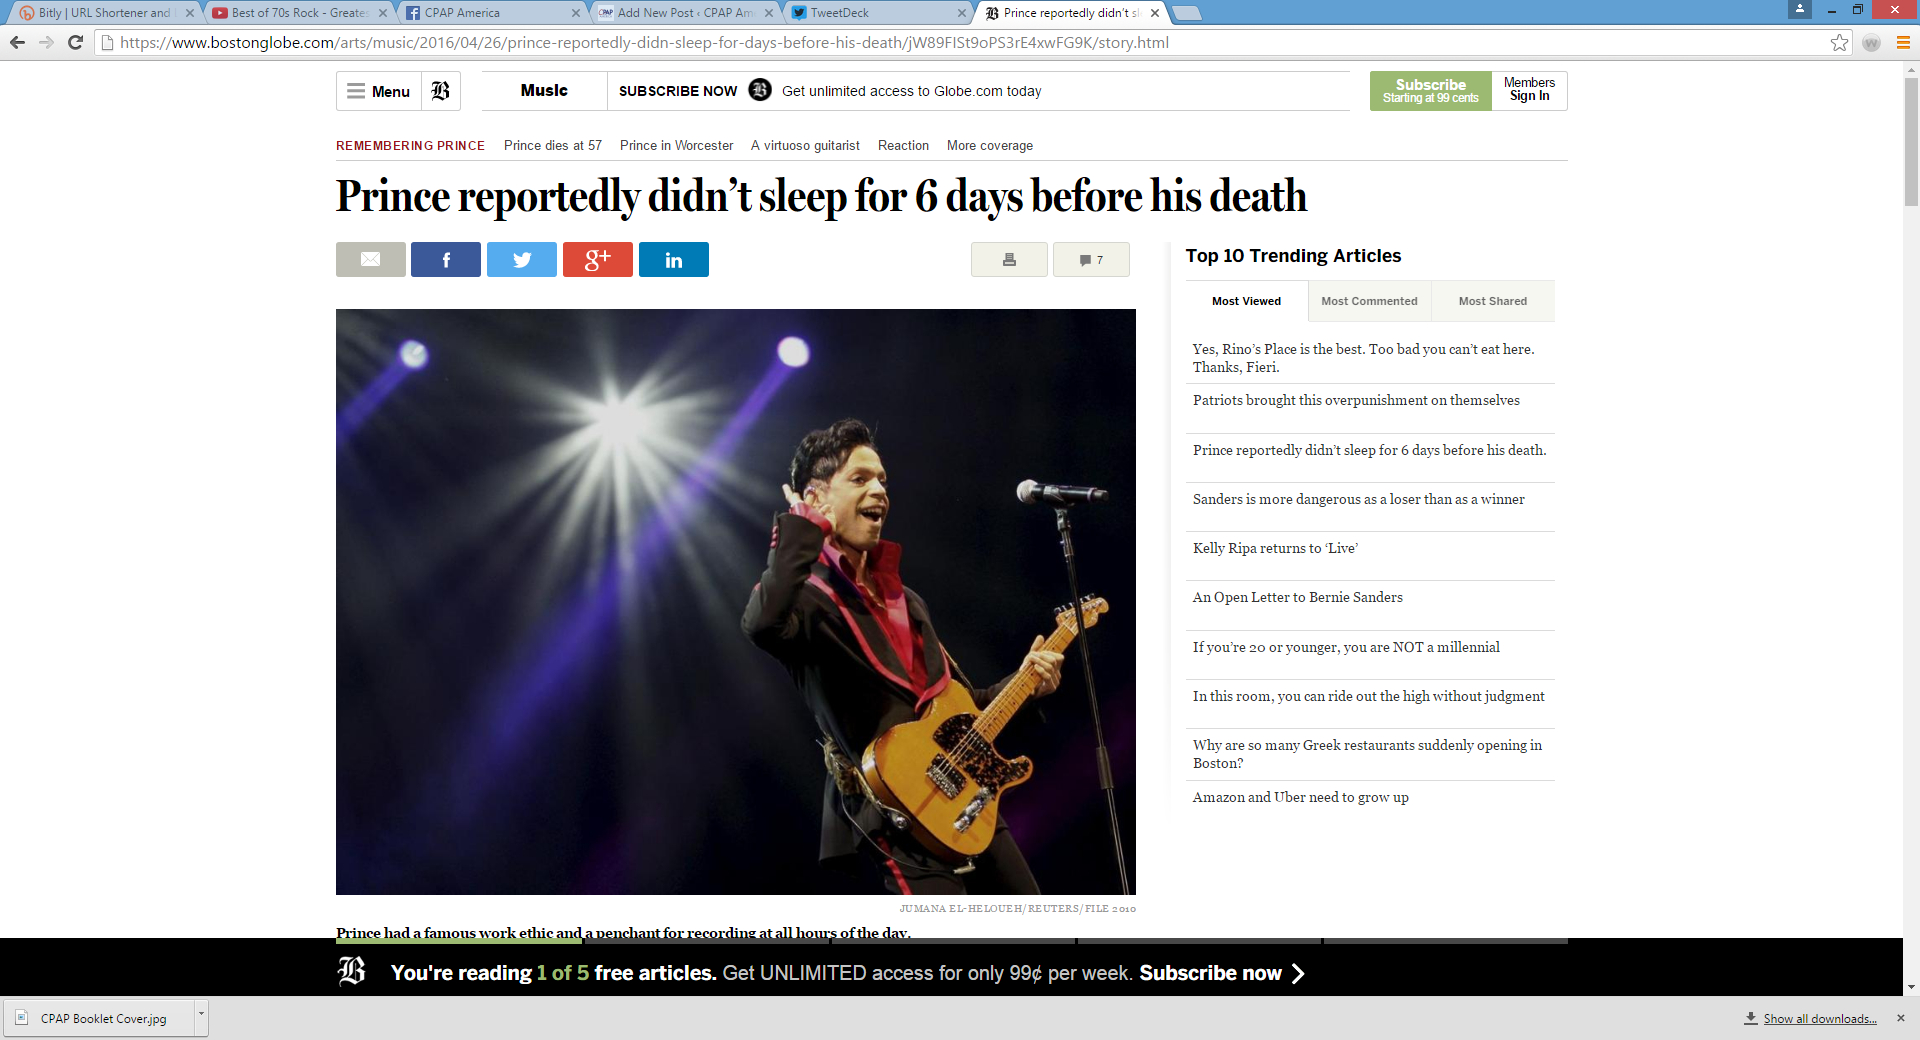 Prince: Did lack of sleep contribute to his death?